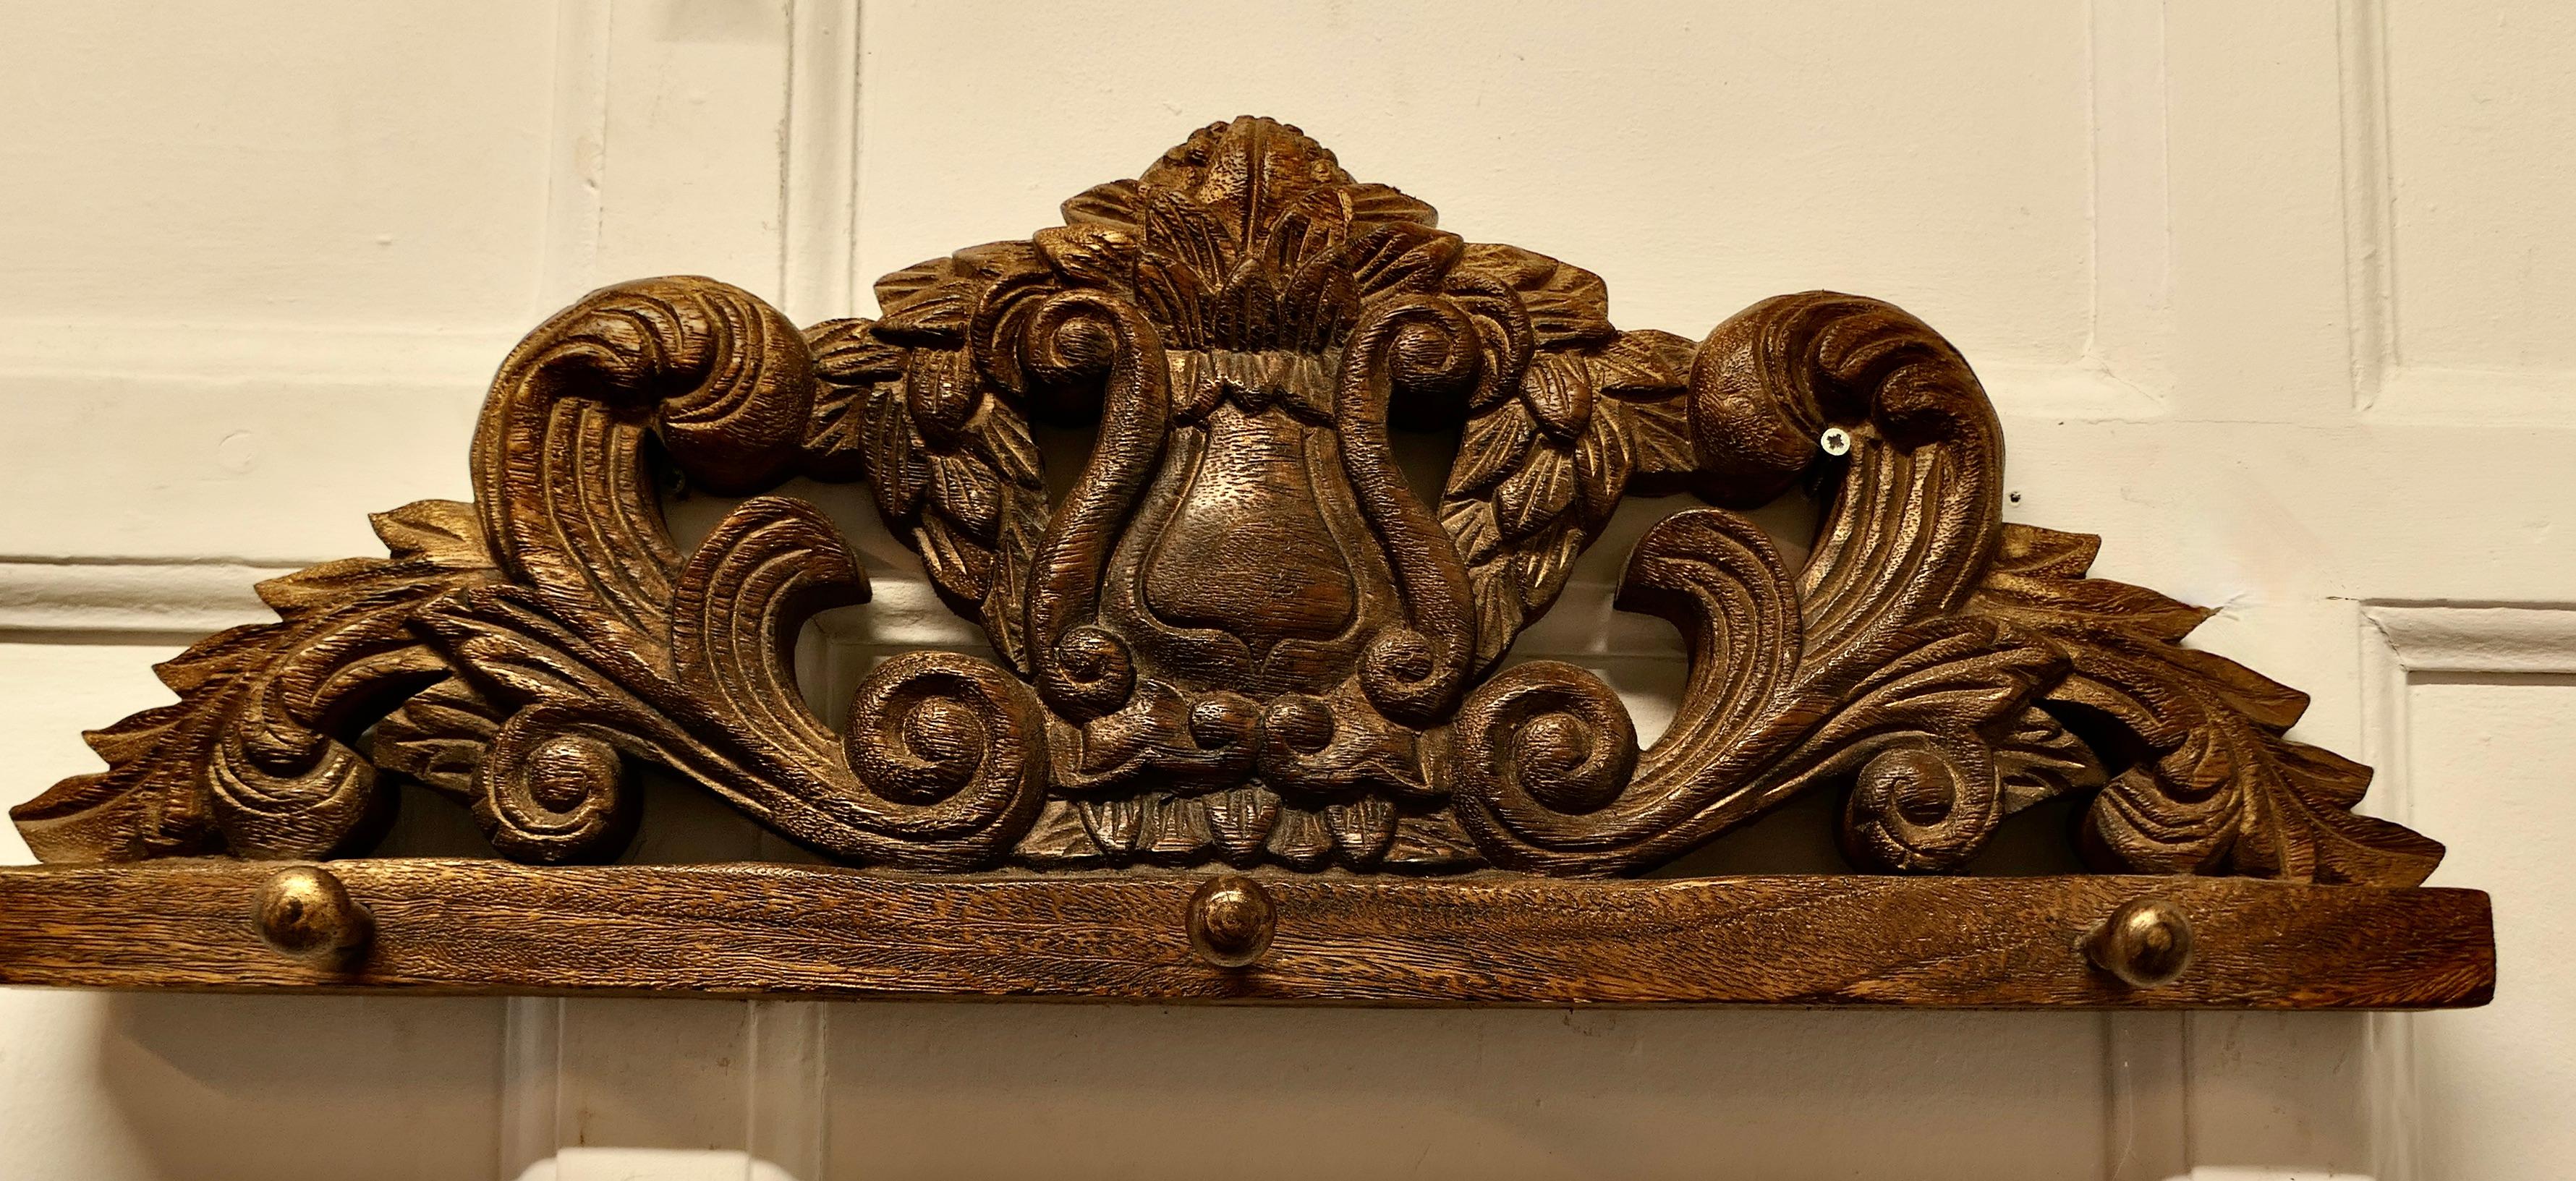 19th Century Carved OakWall Hanging Coat Rack 

 19th Century Carved Wall Hanging Coat Rack for coats umbrellas or hats

This is a solid carved wall piece, it is deeply carved with leaves and a shield, below there are 3 wooden coat hooks
The Rack is